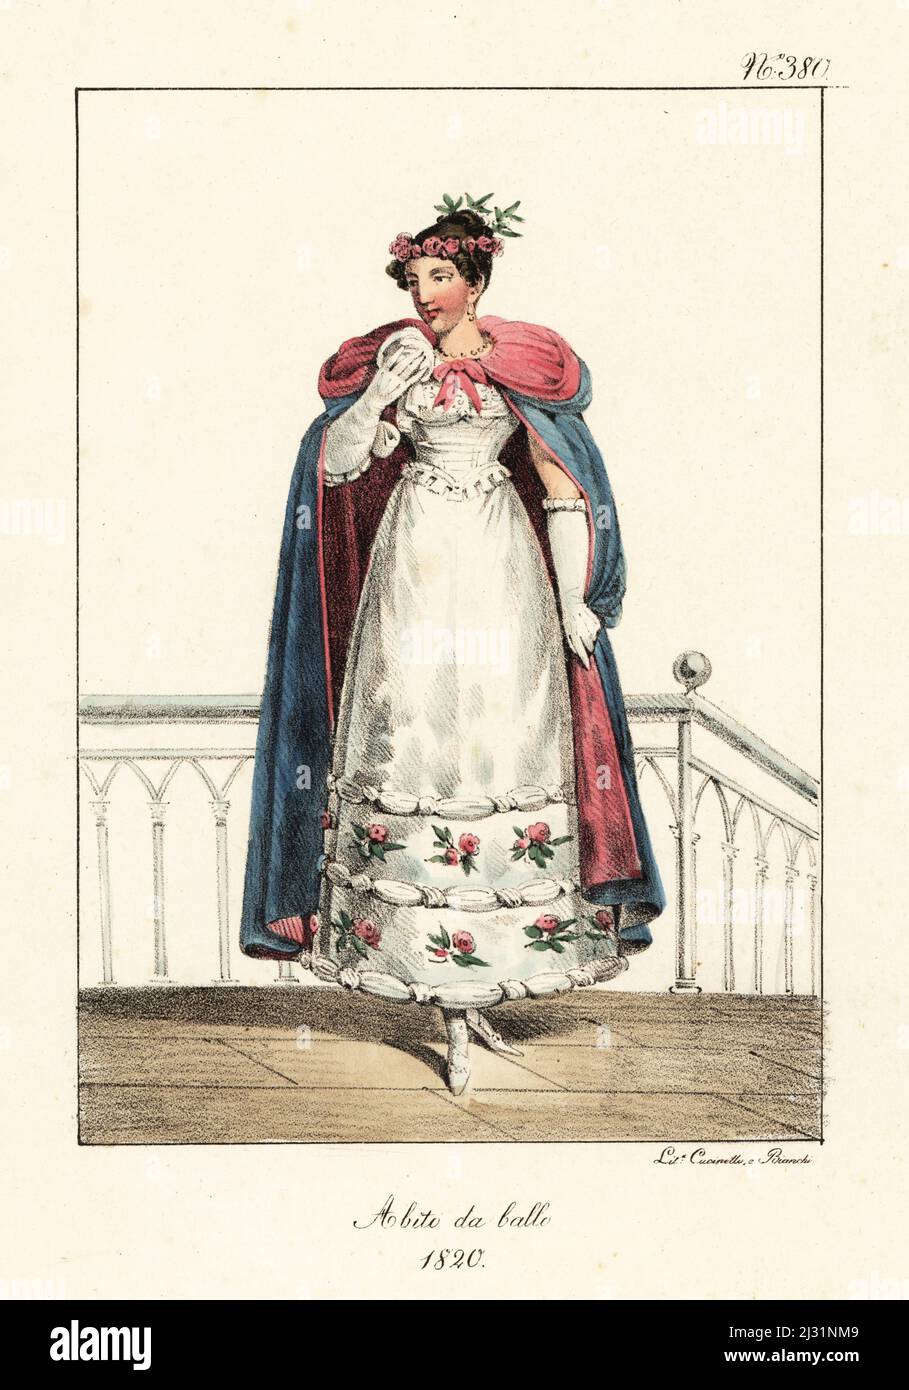 Fashionable French woman in ball gown, 1820. In floral headdress, velvet cape, white dress decorated with embroidered roses and ribbons. Costume du Bal. Handcoloured lithograph by Lorenzo Bianchi and Domenico Cuciniello after Hippolyte Lecomte from Costumi civili e militari della monarchia francese dal 1200 al 1820, Naples, 1825. Italian edition of Lecomte’s Civilian and military costumes of the French monarchy from 1200 to 1820. Stock Photo